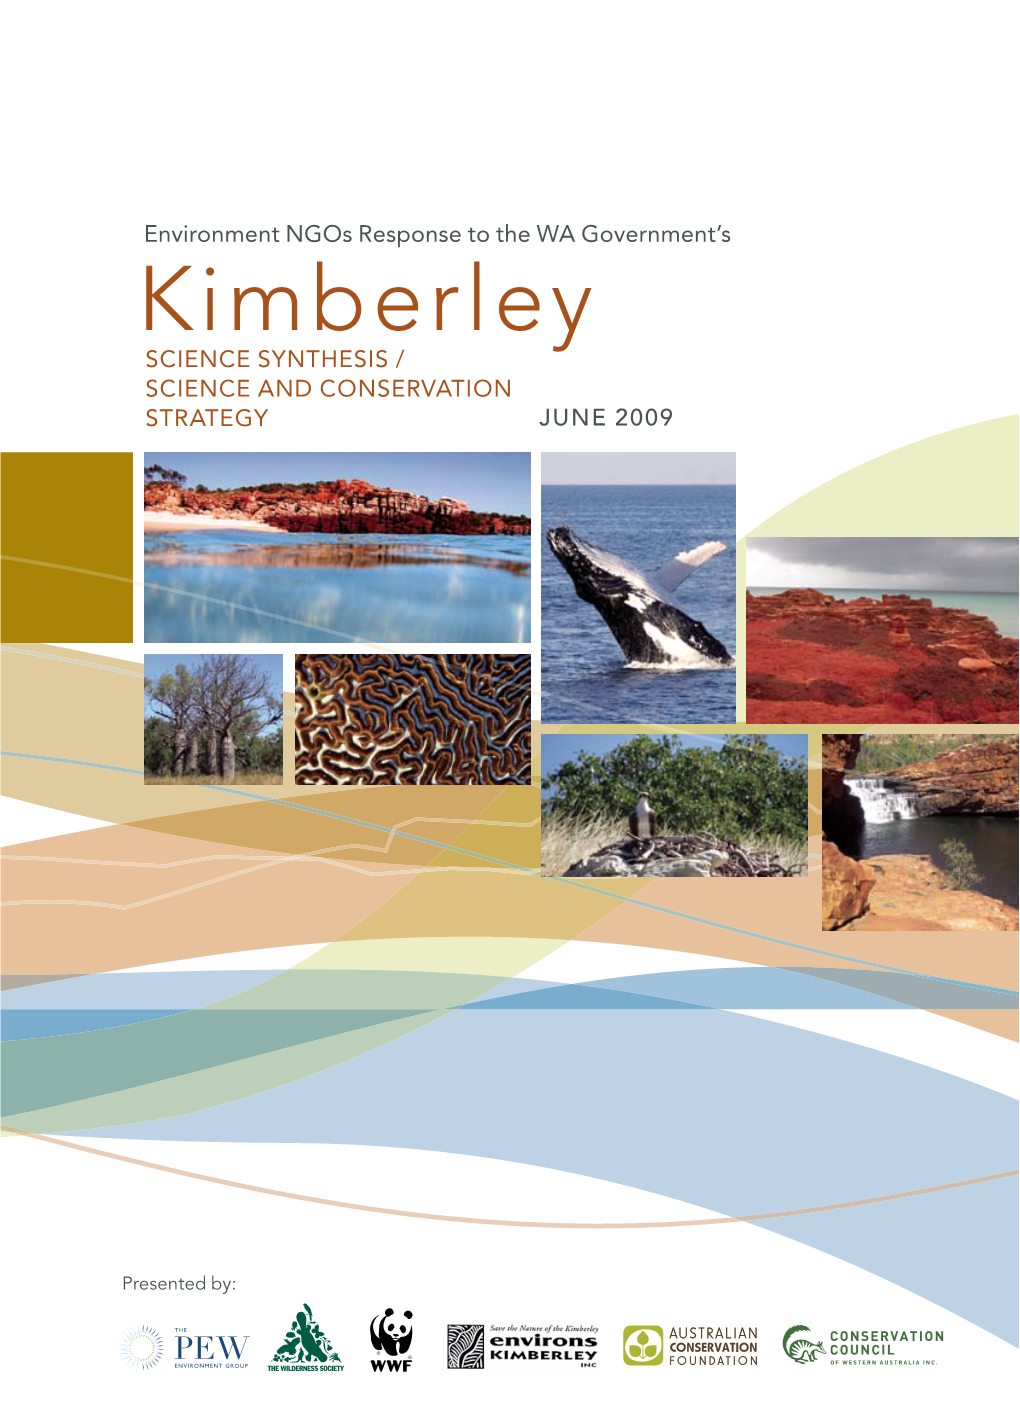 Kimberley SCIENCE SYNTHESIS / SCIENCE and CONSERVATION STRATEGY JUNE 2009